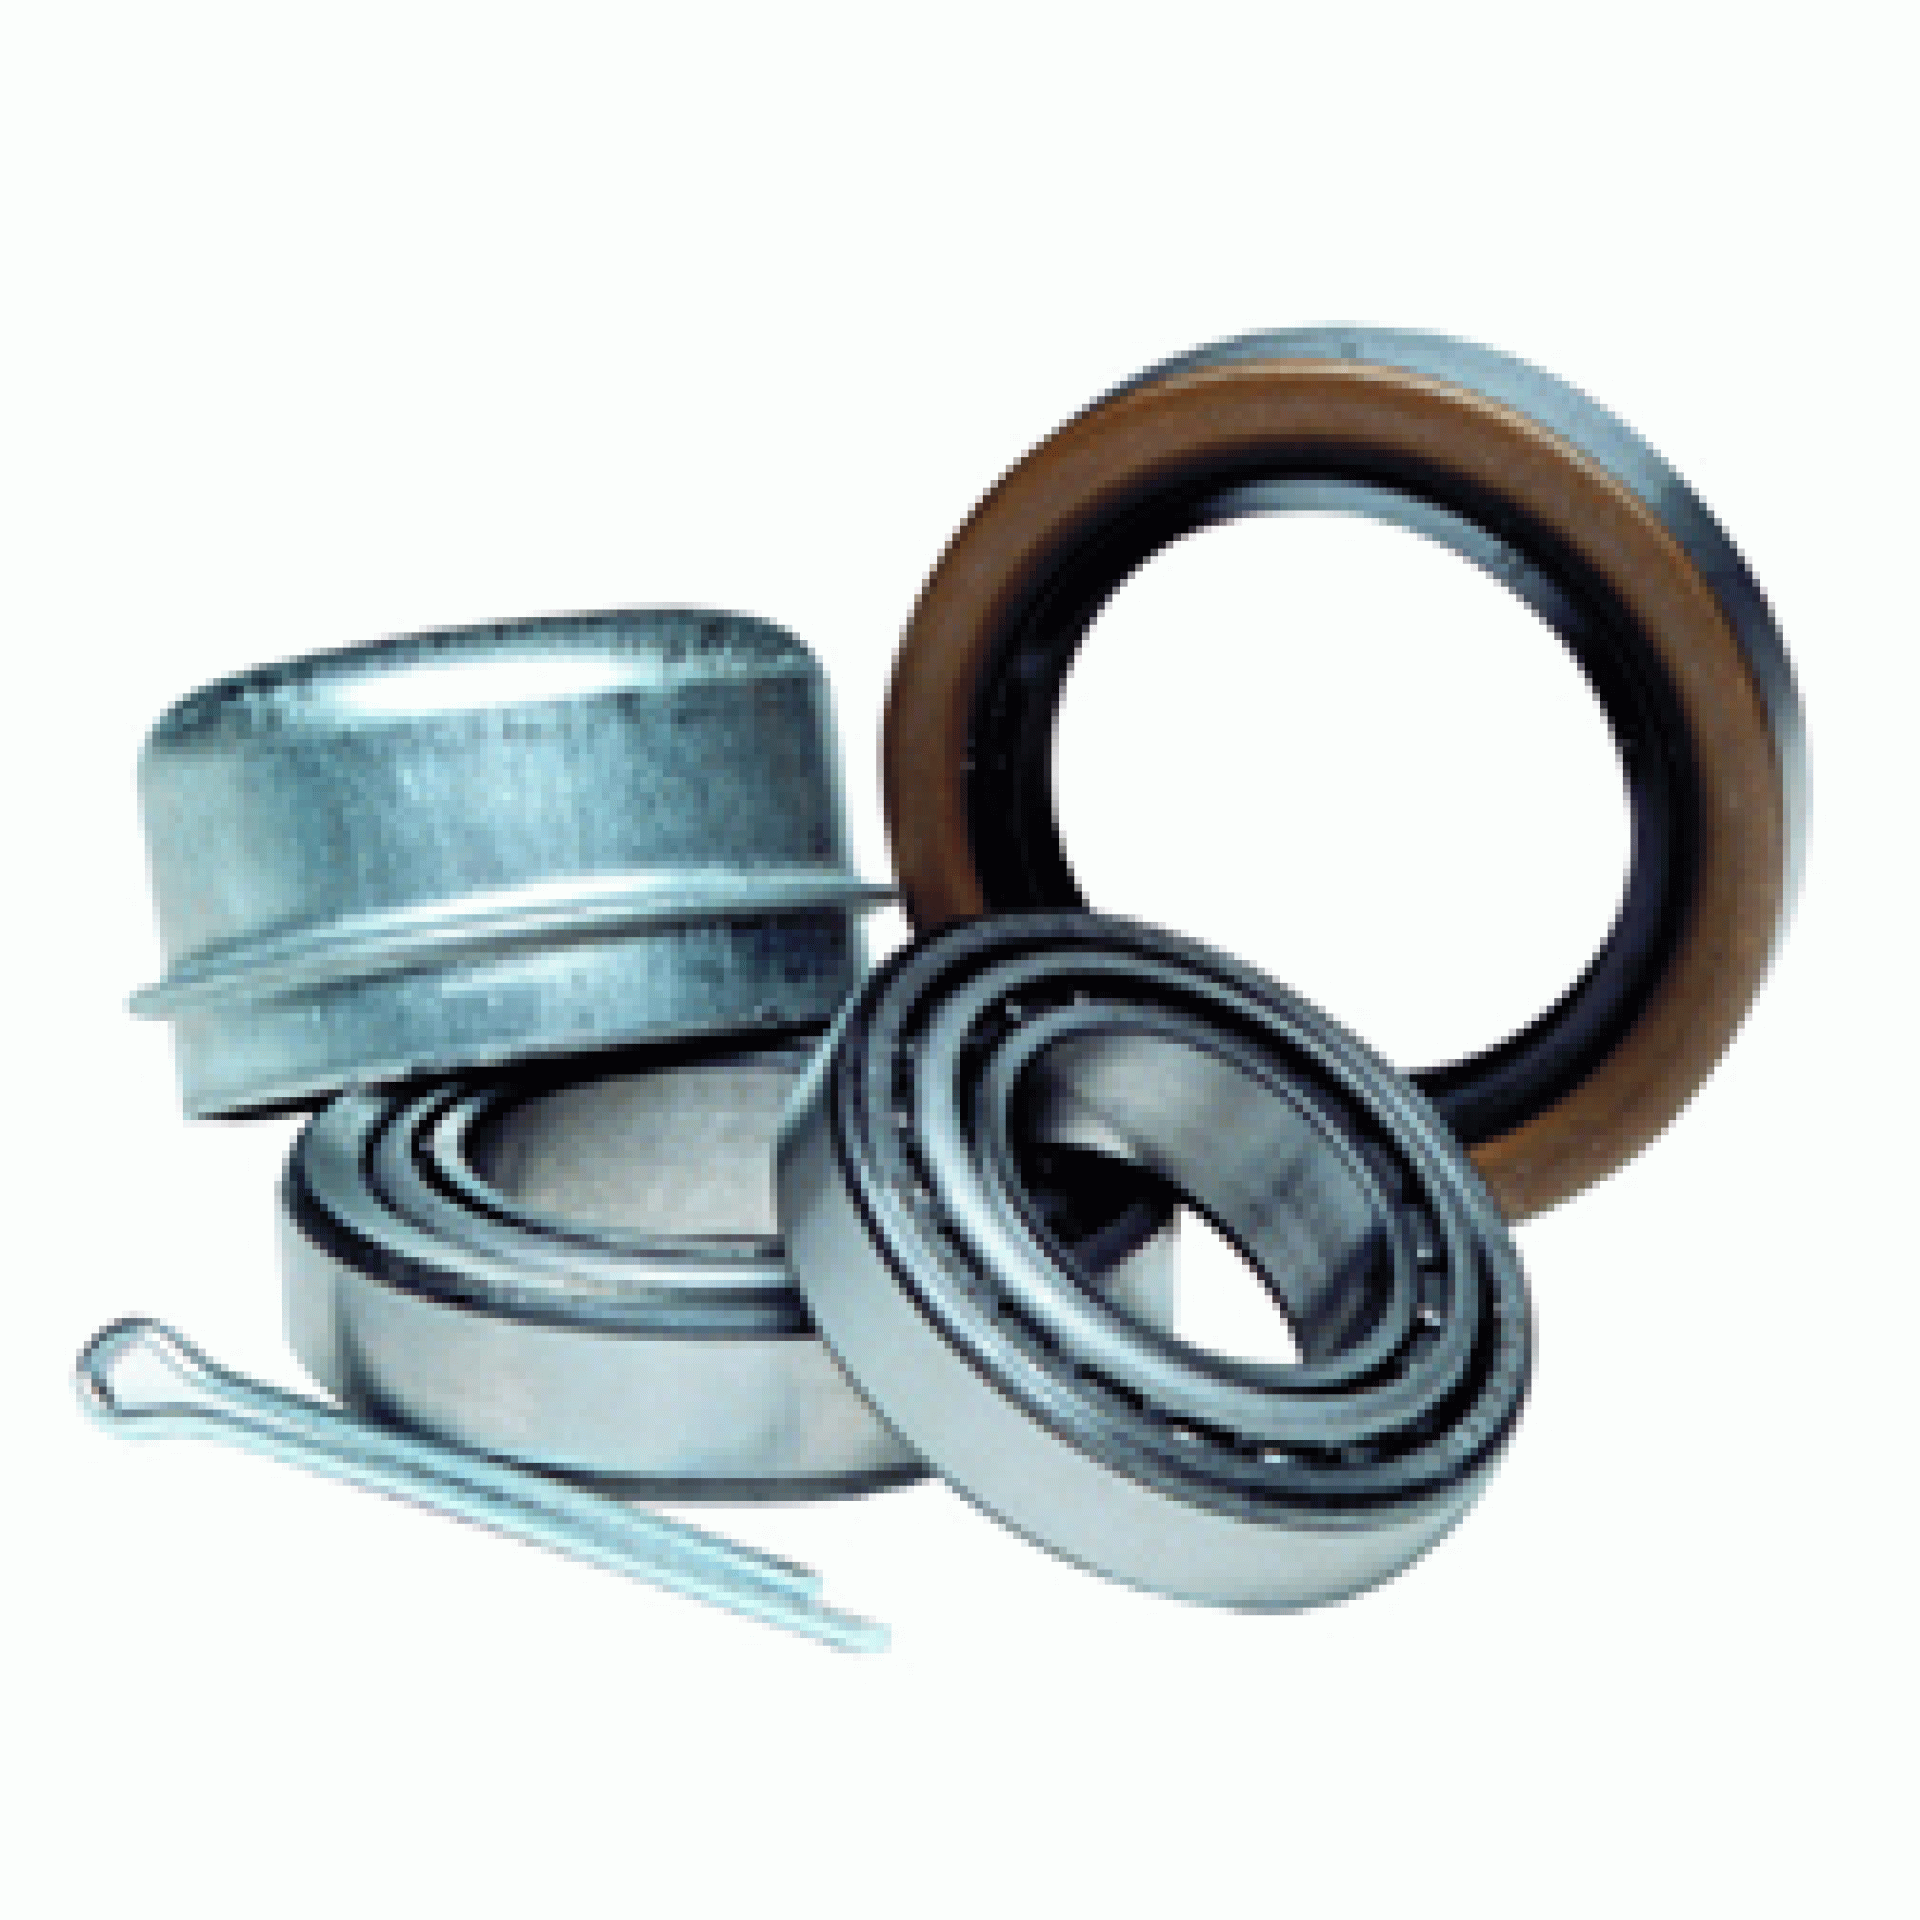 DEXTER MARINE PRODUCTS OF GEORGIA LC | K71-G02-52 | BEARING KIT- 1-1/4" X 3/4" TAPERED SPINDLE WITH DUST CAP LM11949 & LM67048 CONE LM11910 & LM67010 CUP